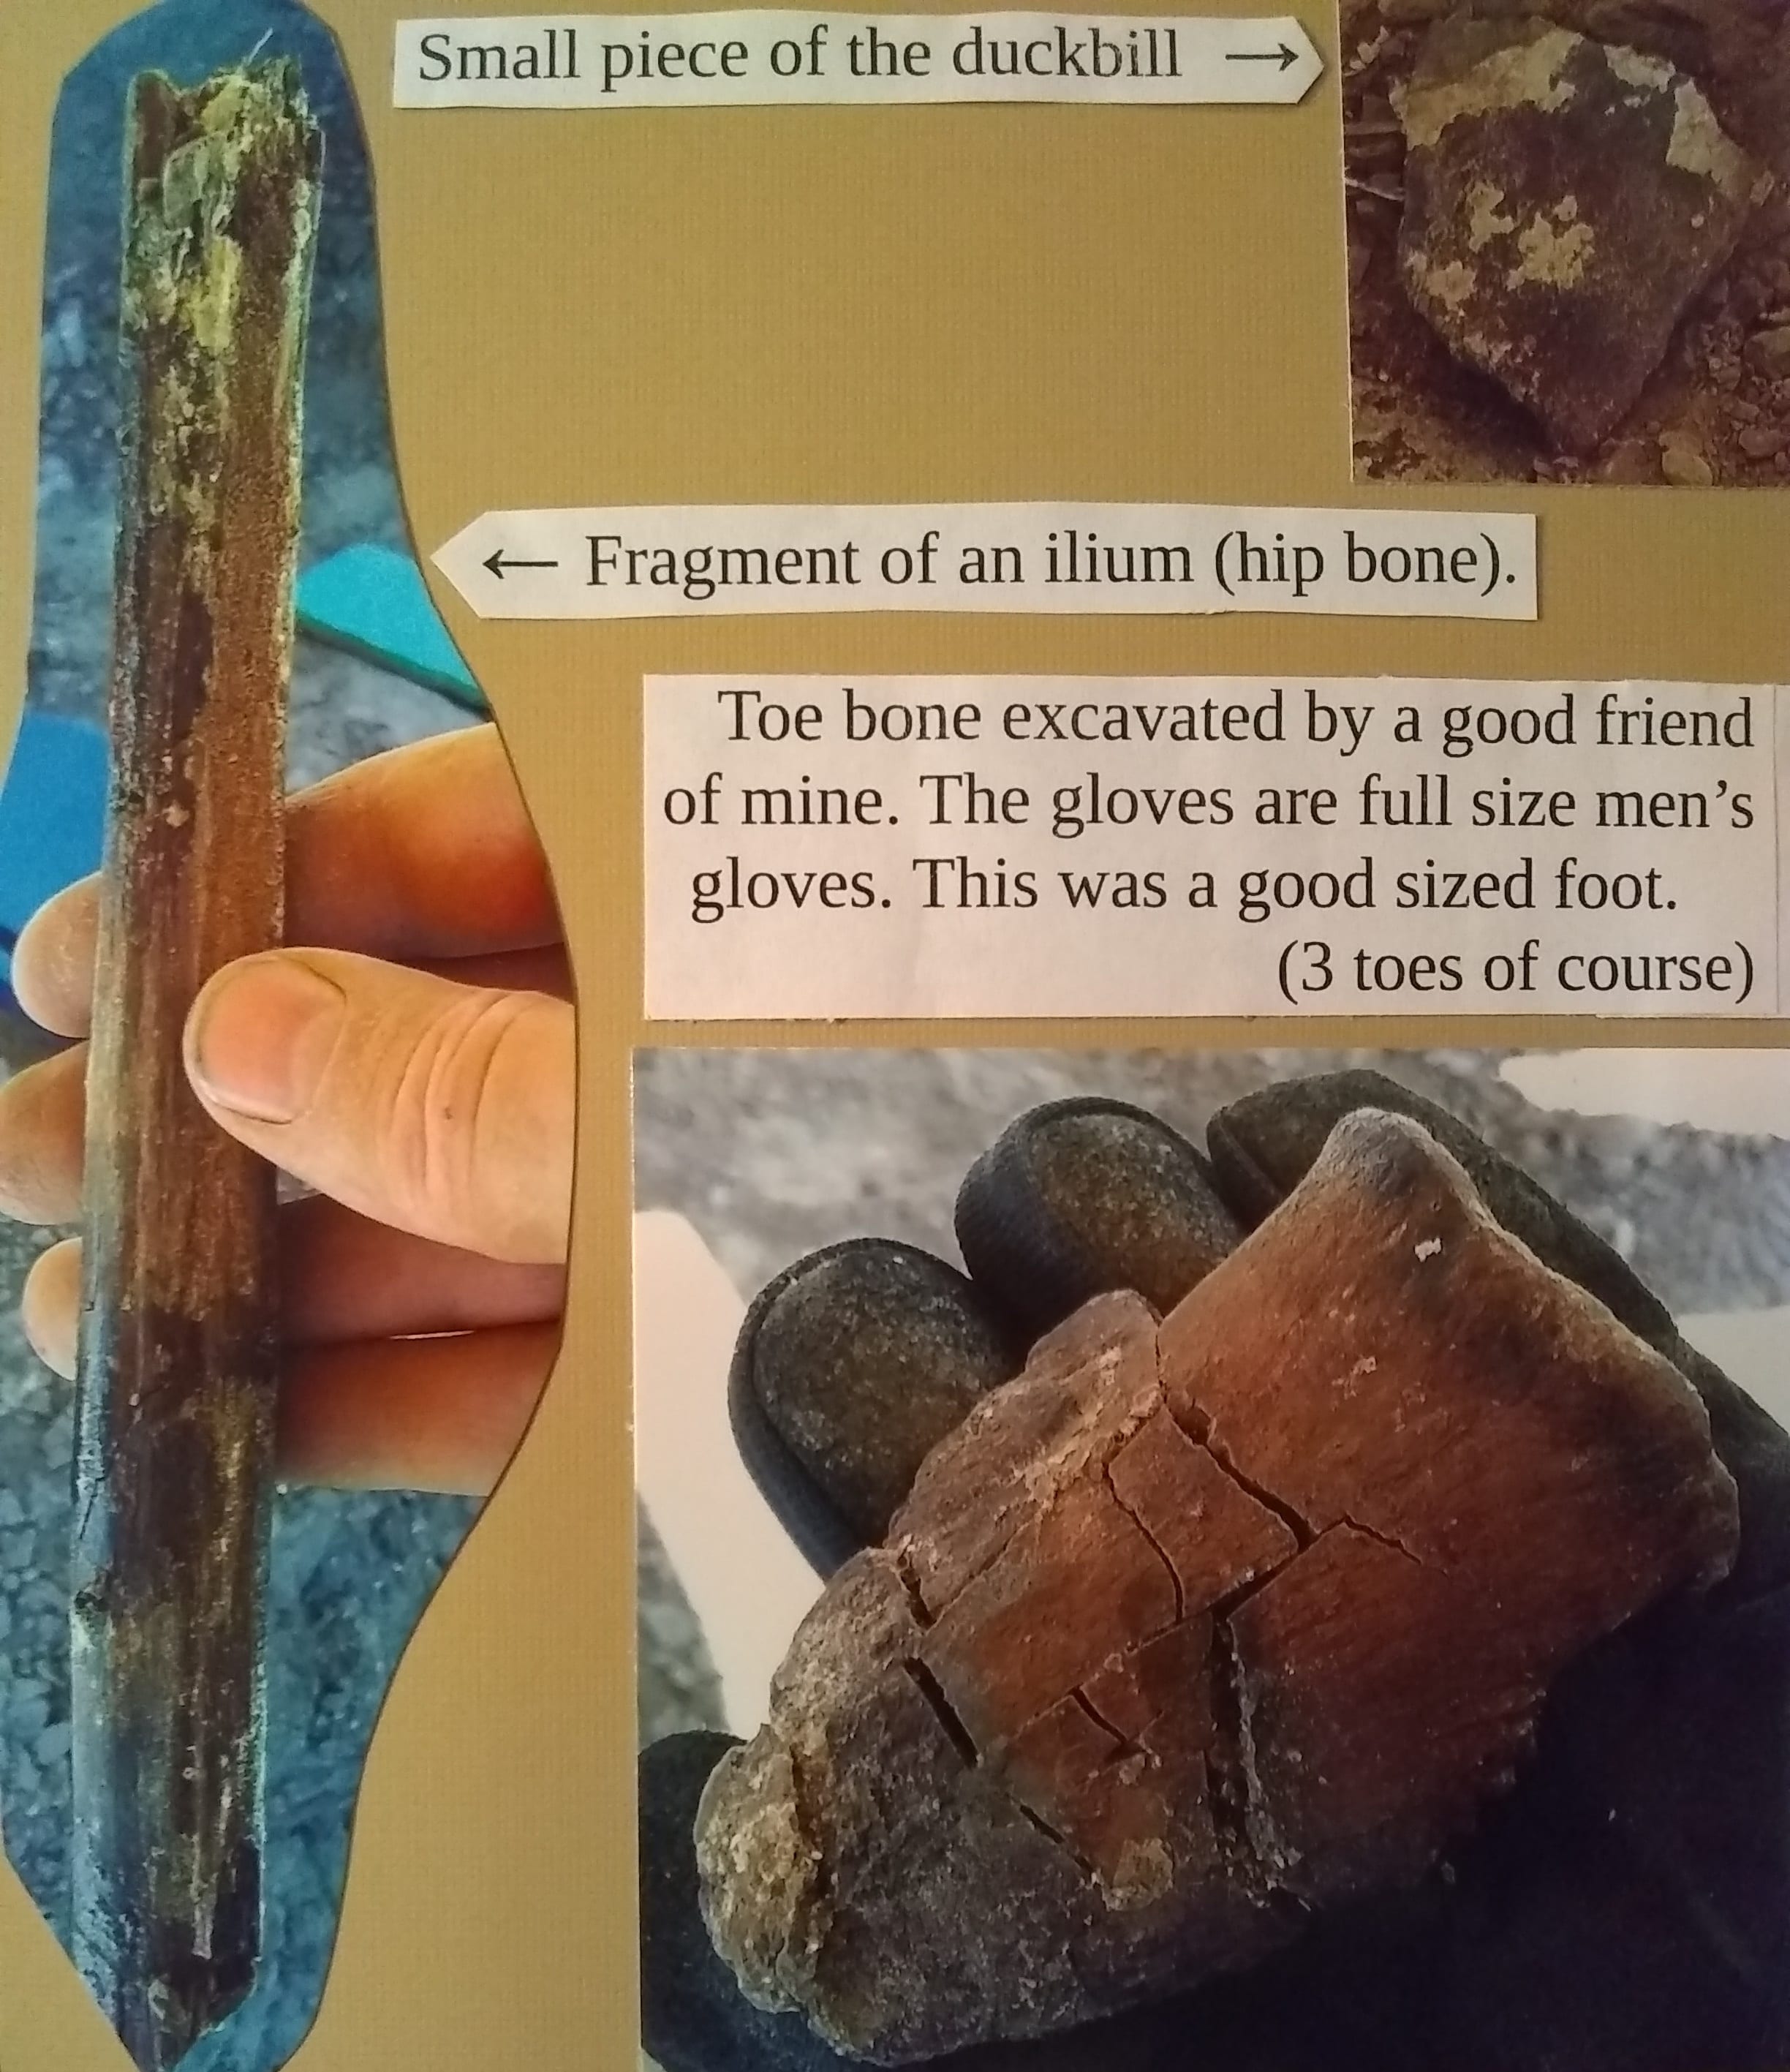 Right: Small piece of the duckbill. Left: Fragment of an ilium (hip bone). Bottom: Toe bone excavated by a good friend of mine. The gloves are full size men's gloves. this was a good sized foot. (3 toes of course)